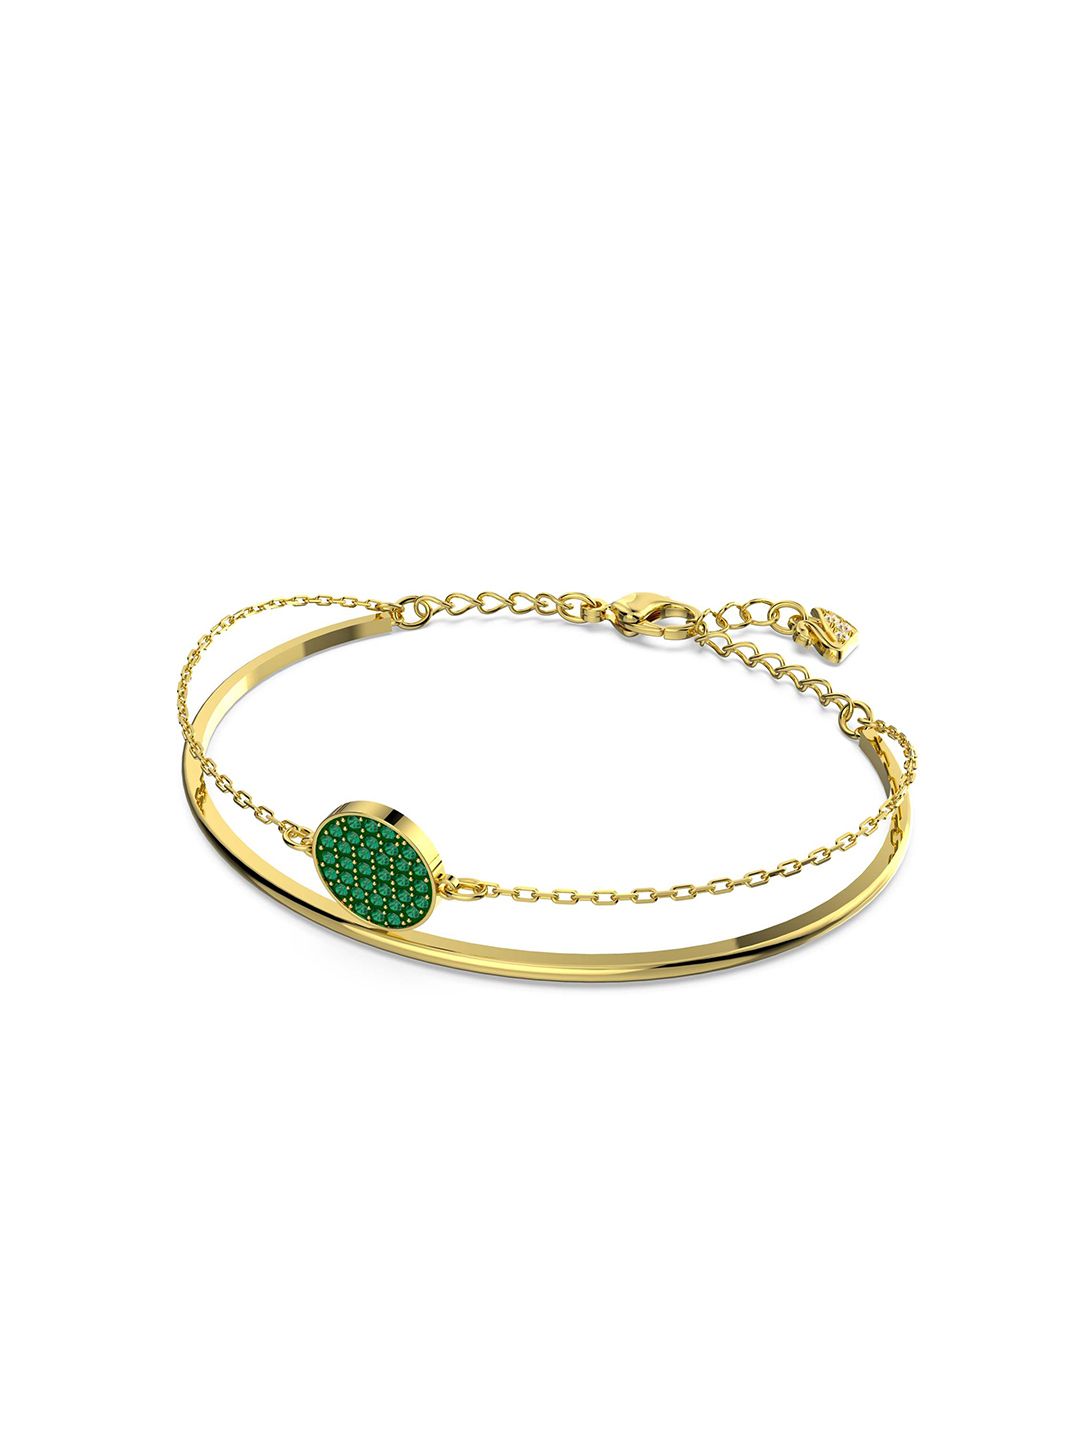 SWAROVSKI Women Green & Gold-Toned Crystals Studded Gold-Plated Charm Bracelet Price in India